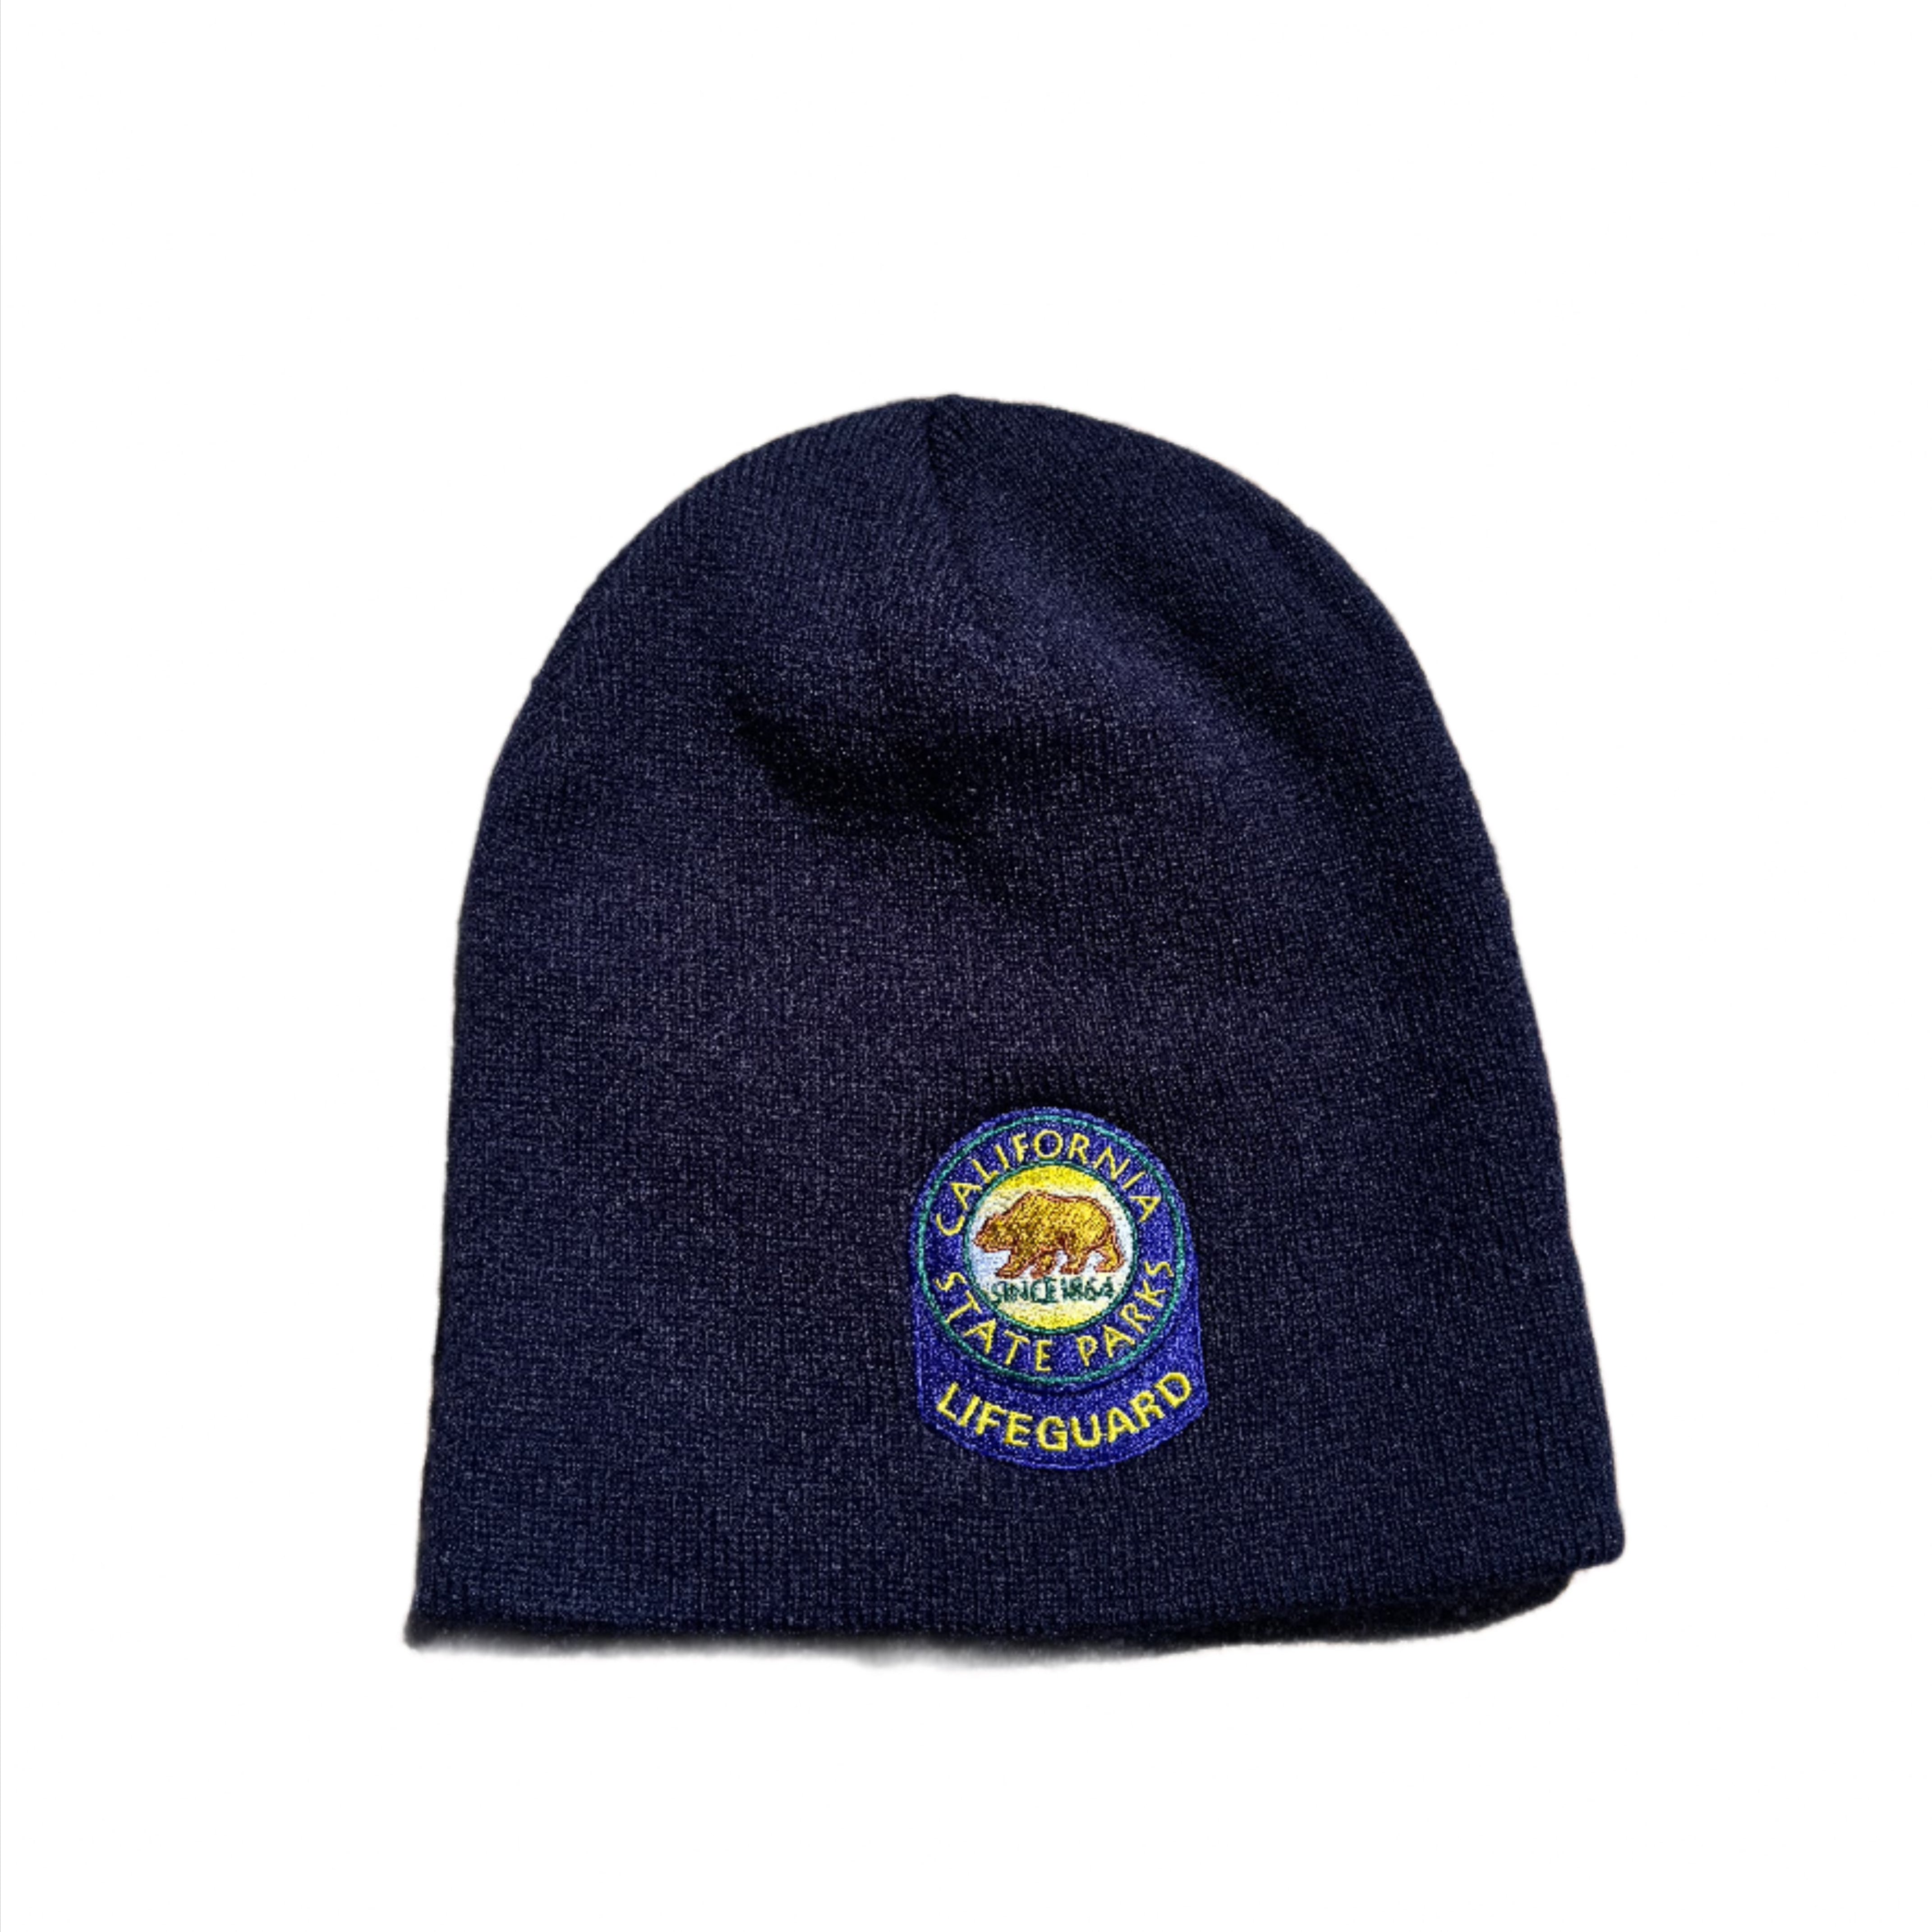 CA STATE PARKS Lifeguard Beanie